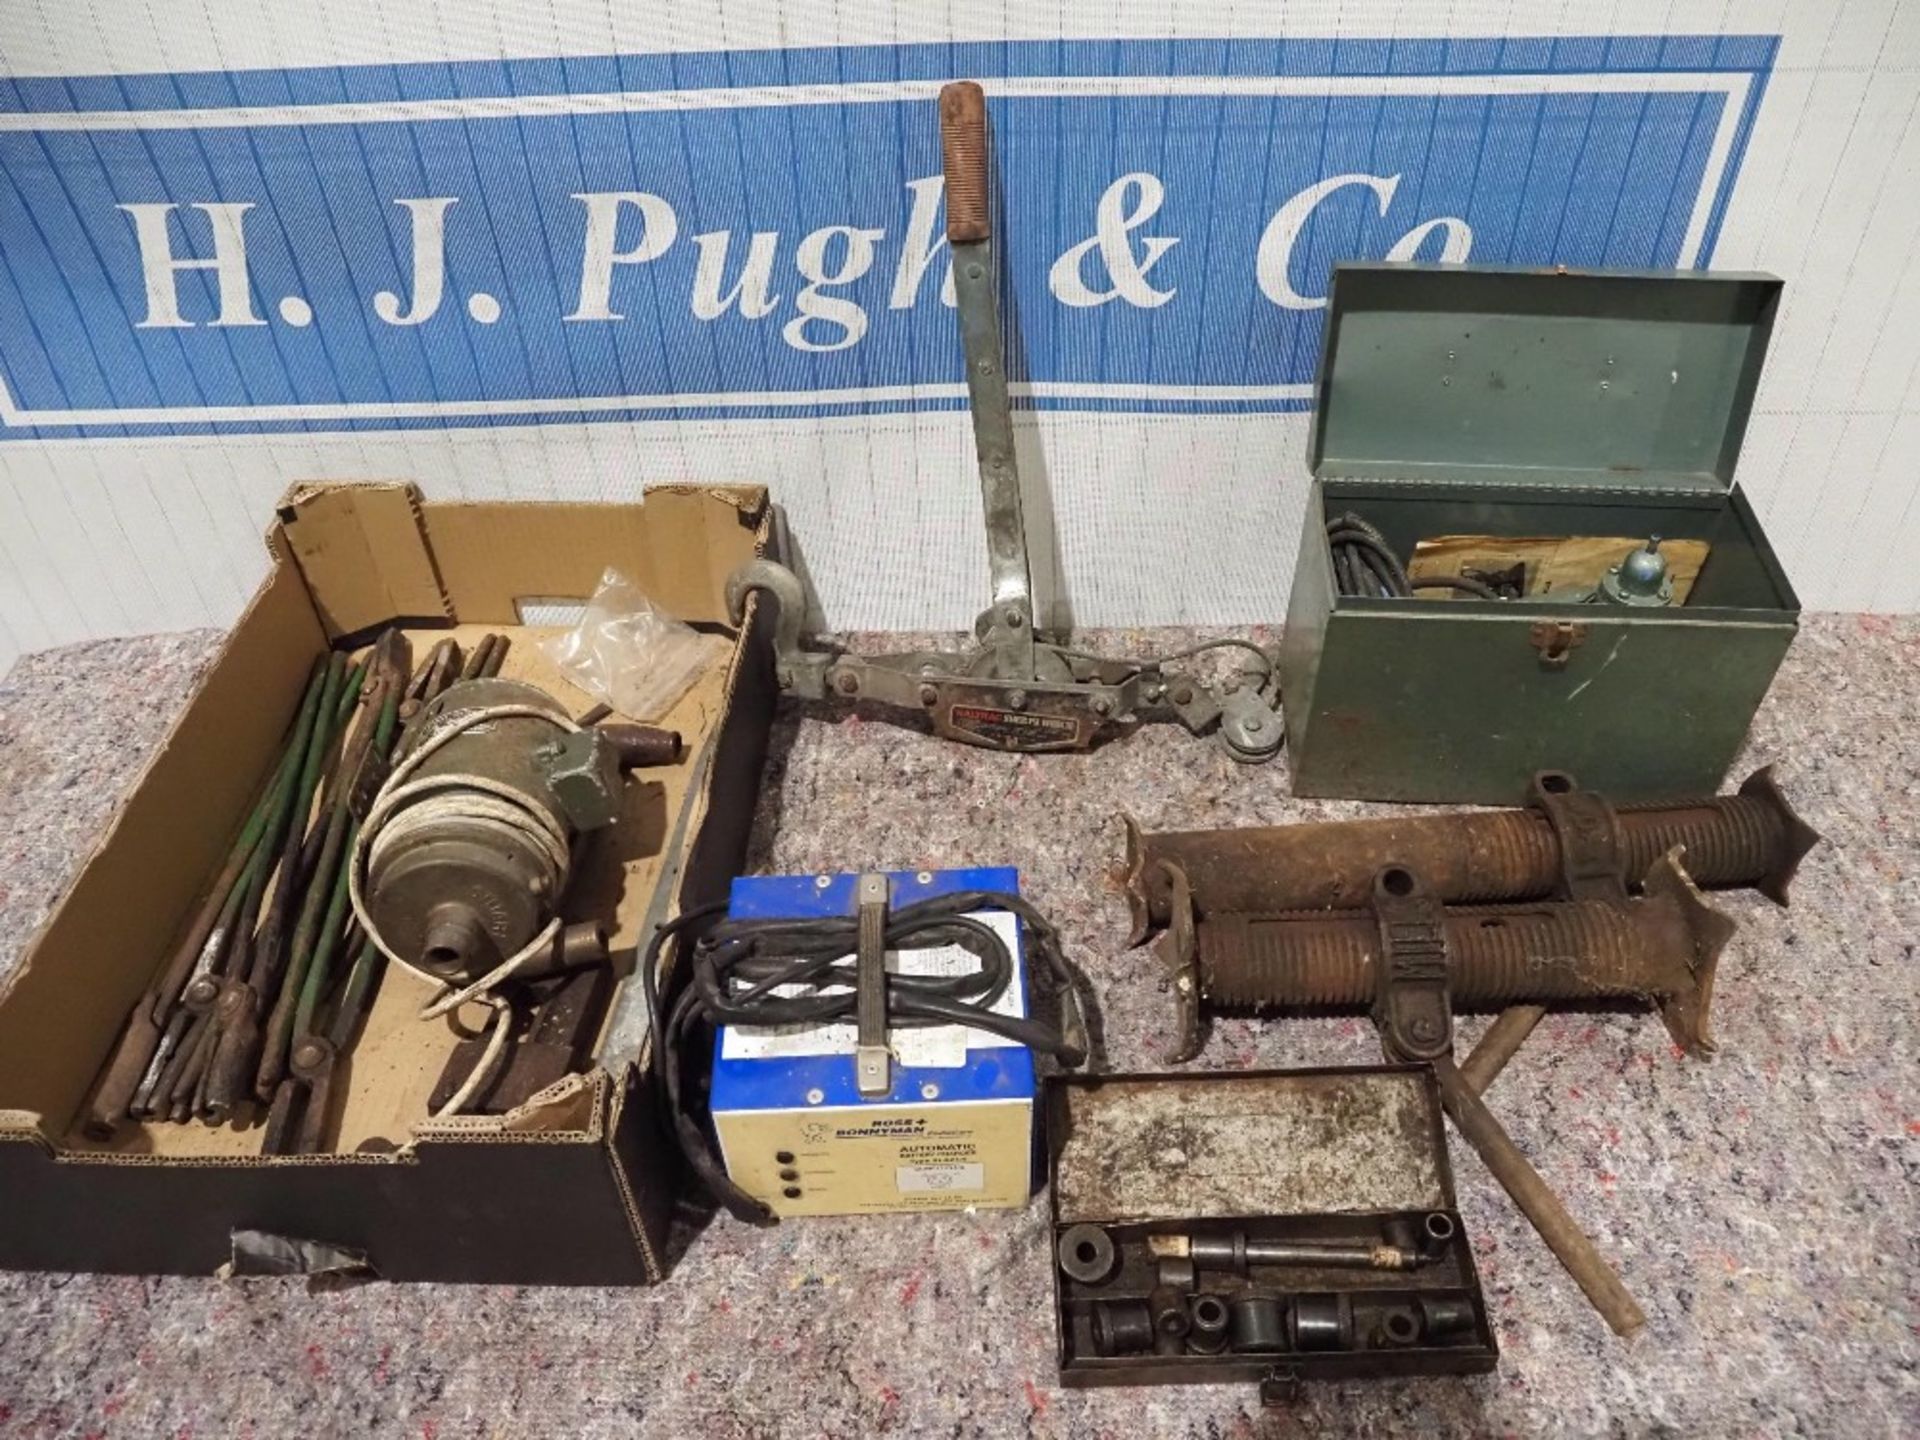 Blacksmith's tools, battery charger, winch, Miller mini spray compressor etc